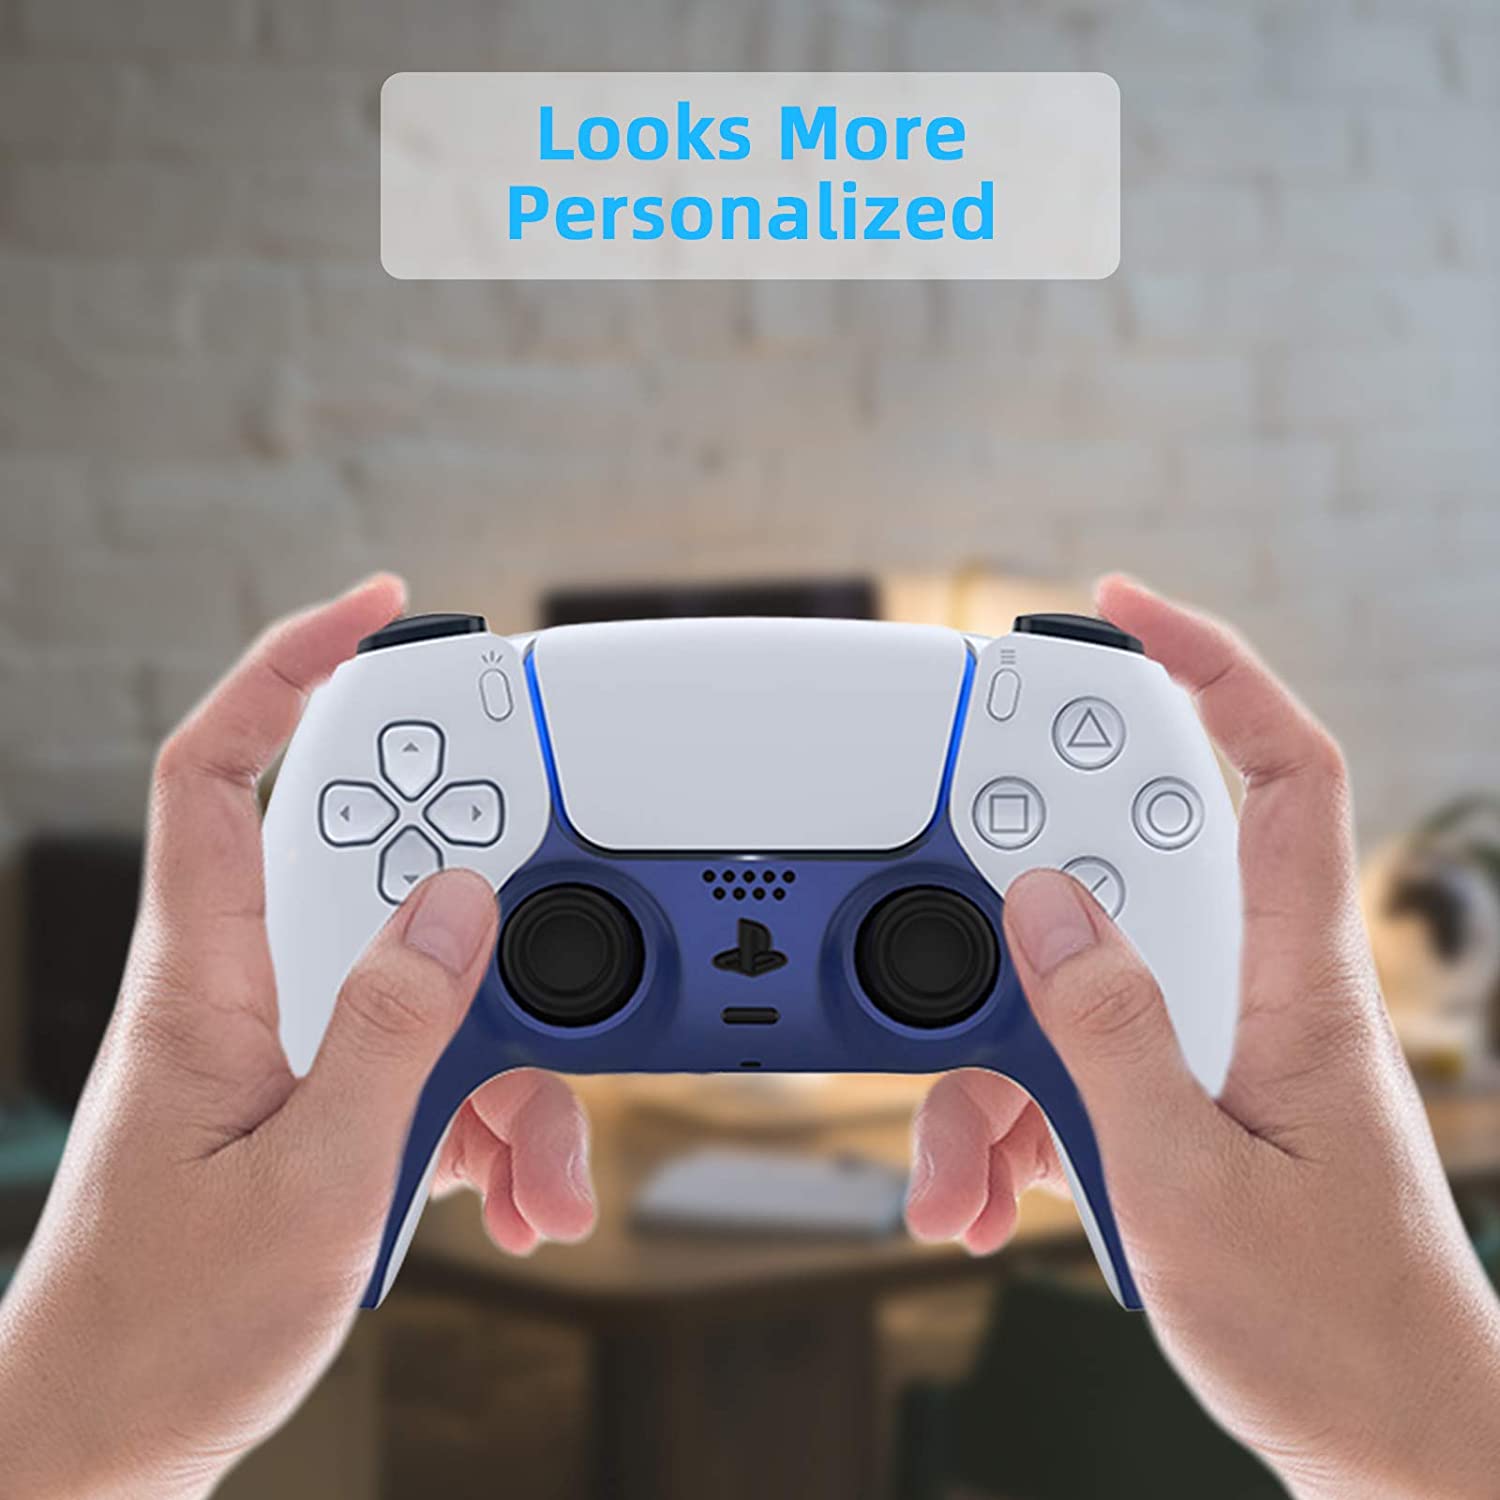 Installing the faceplate on the PS5 controller can showcase your personality.